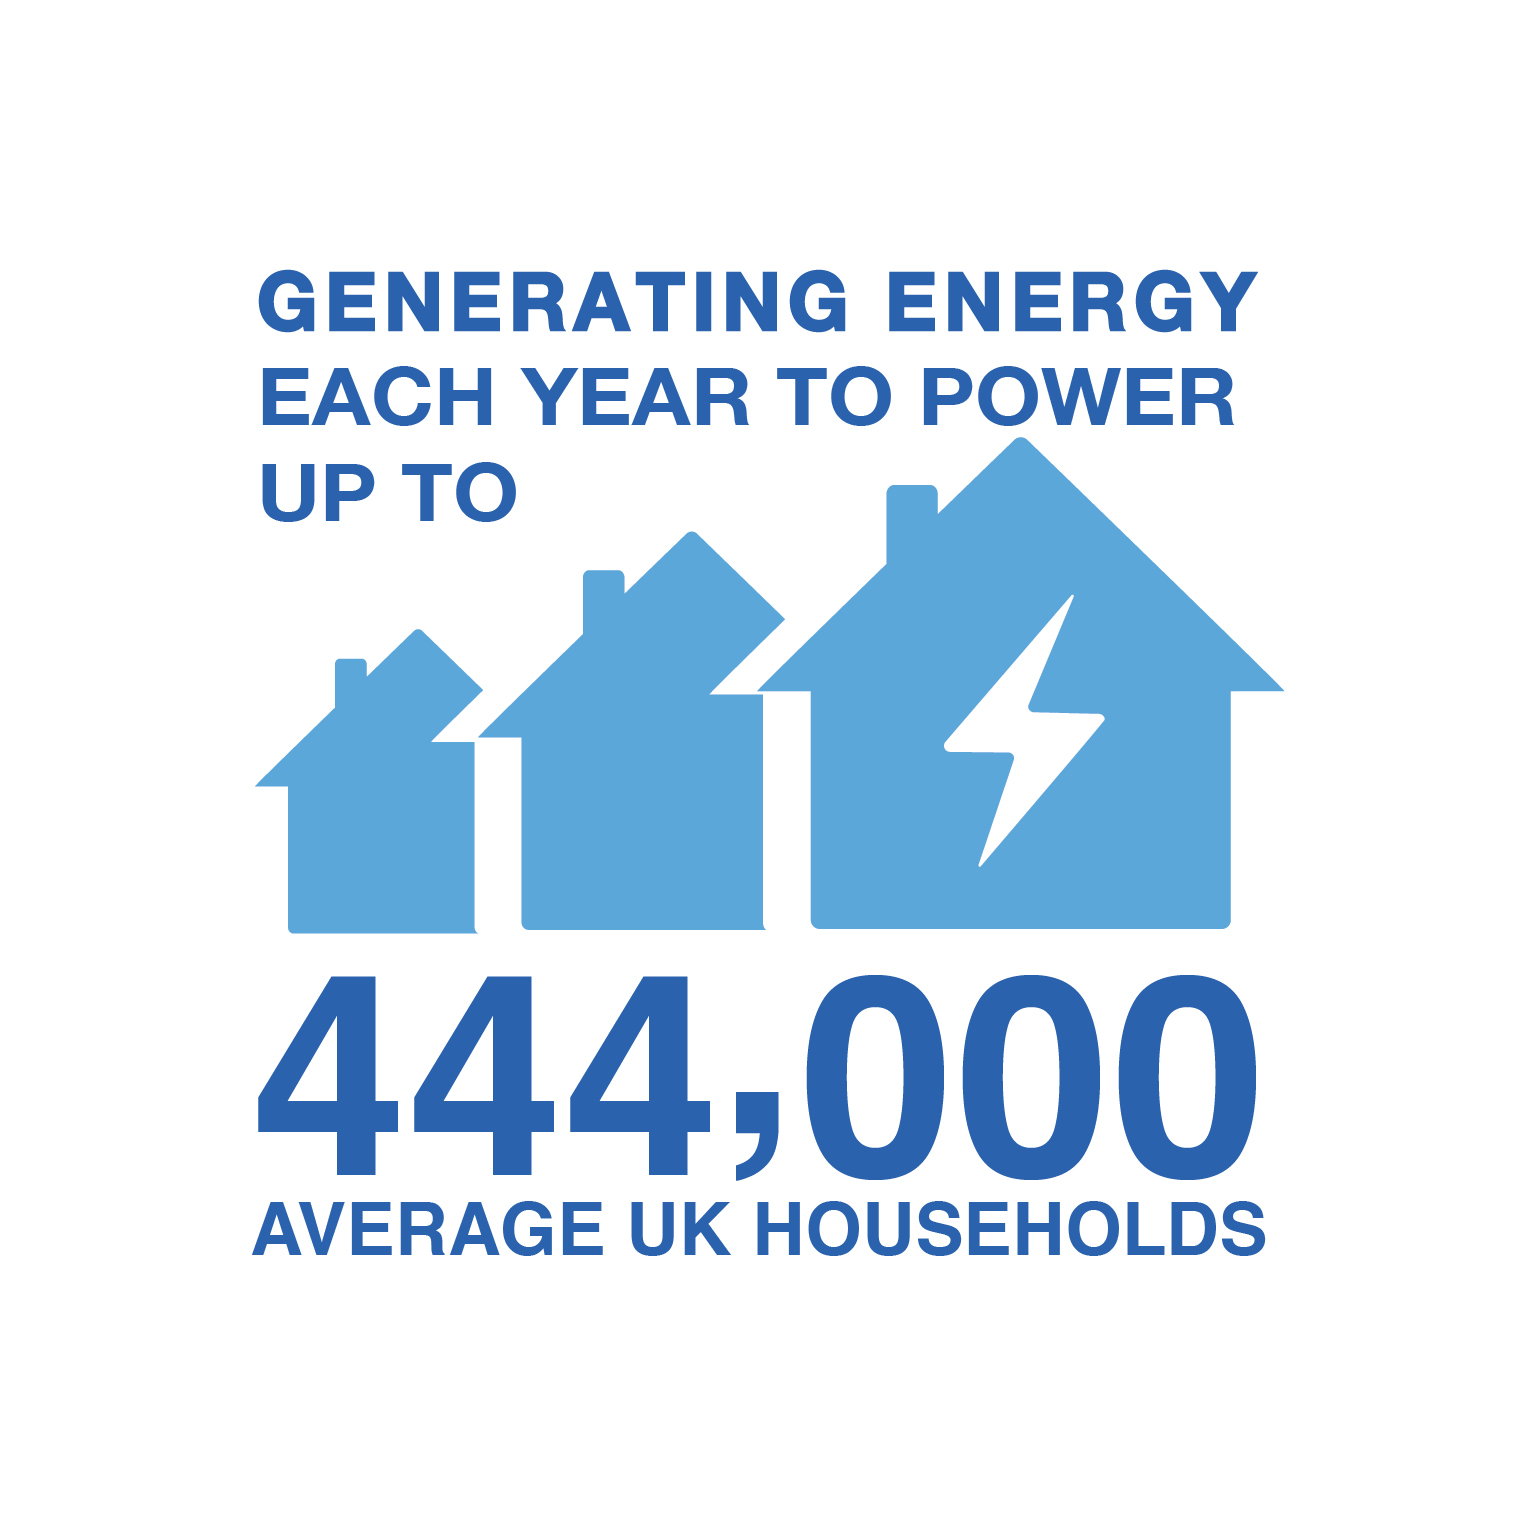 Generating Power For Up To 380,070 Homes